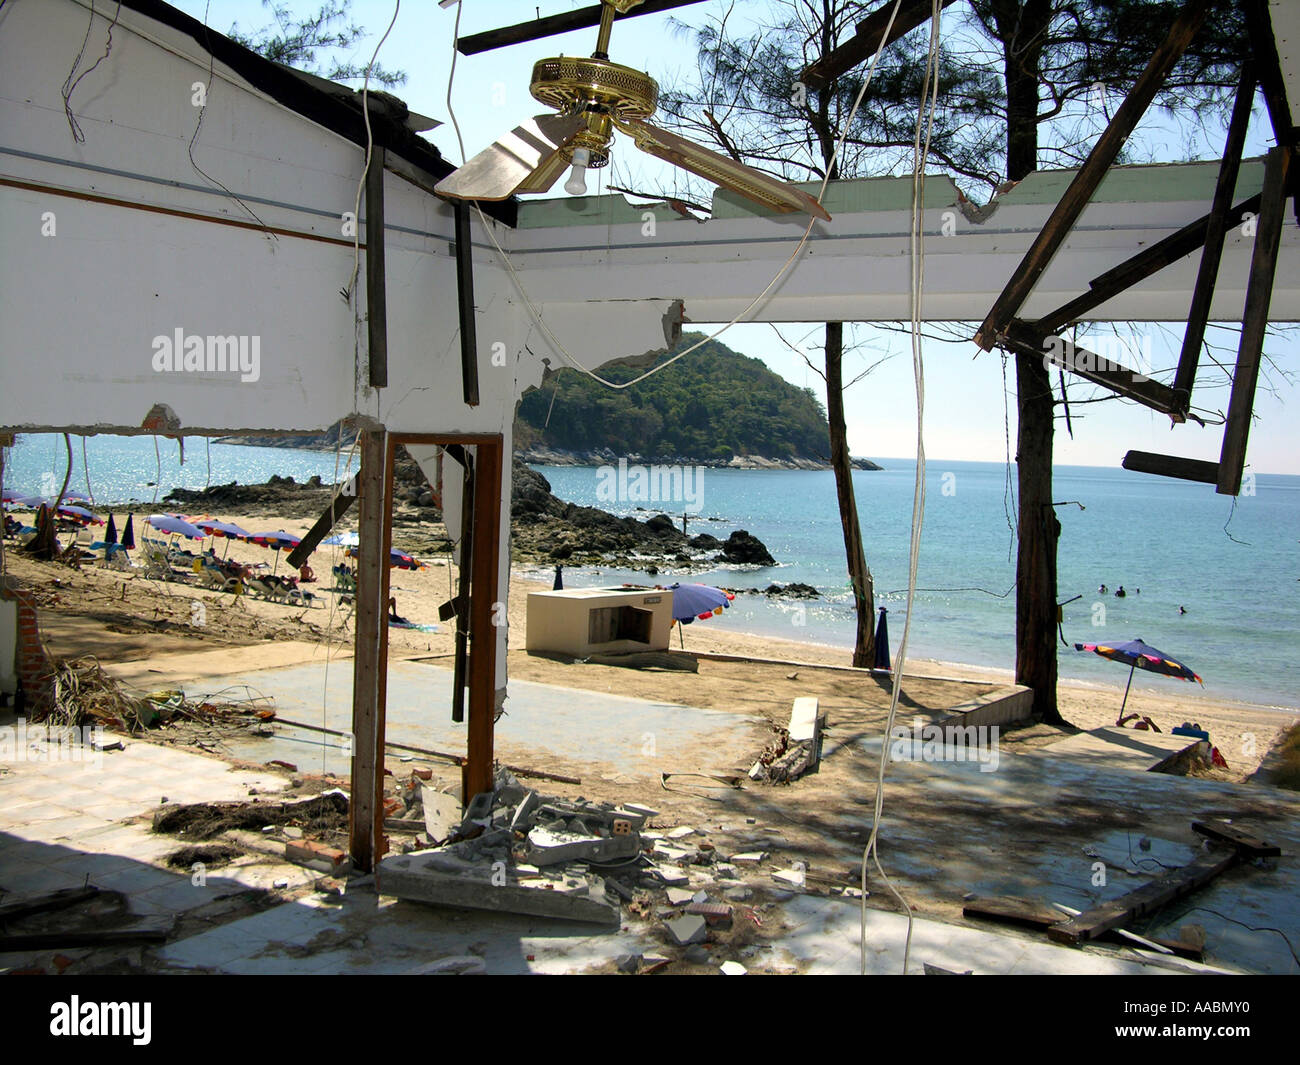 House in Thailand, destroyed by Tsunami Stock Photo